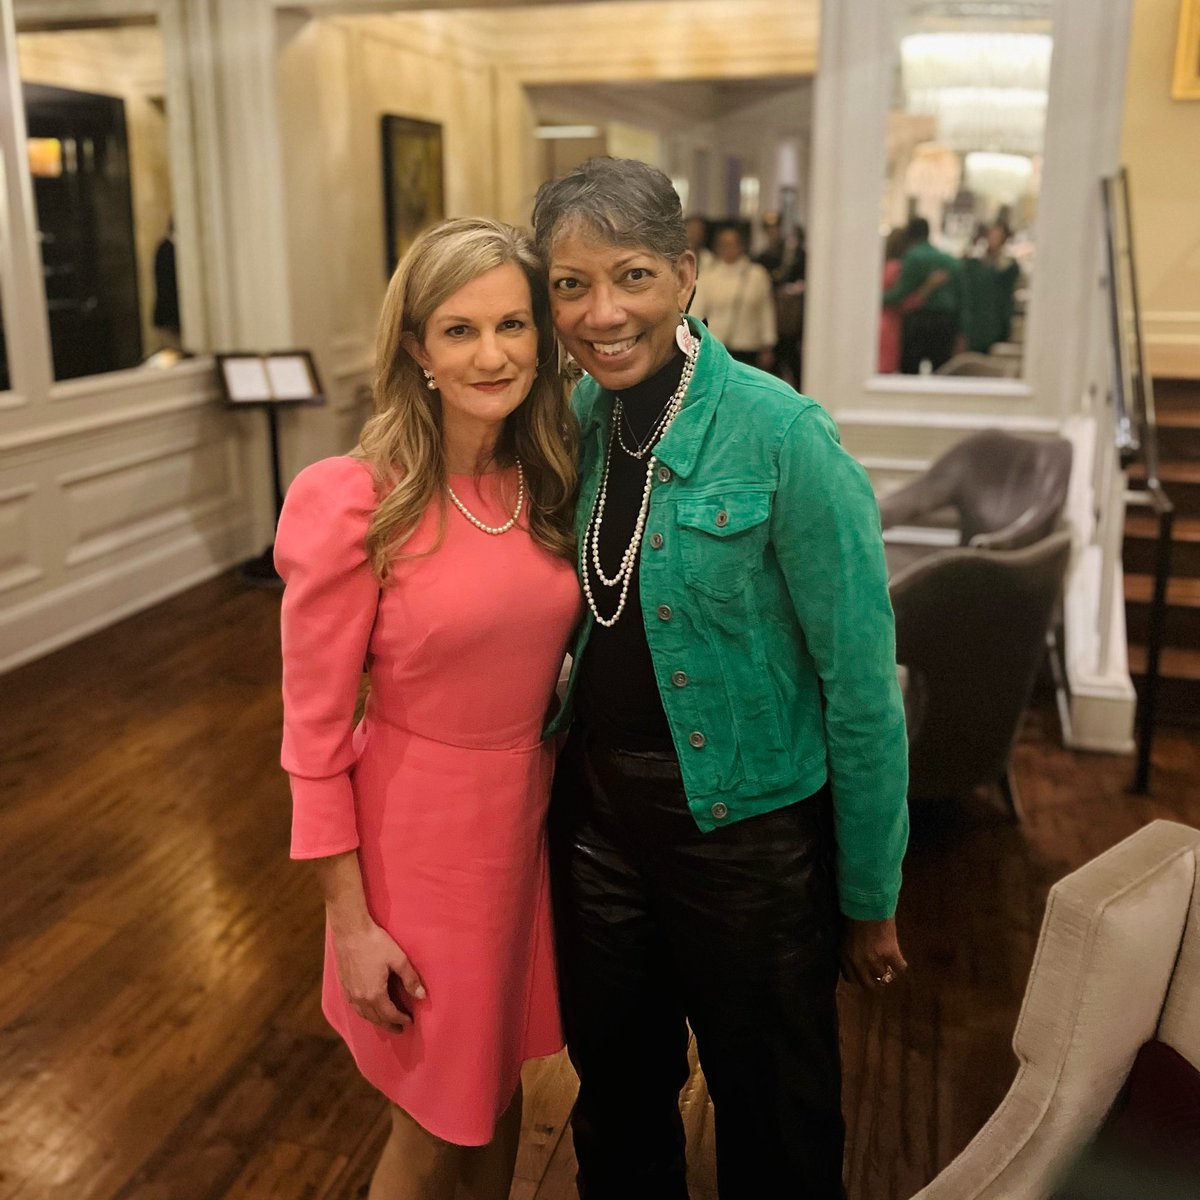 Honored to meet up with powerhouse & inspiration @RickiDOVE of @touchbbca while she was in town speaking at a conference in Charleston. We are excited for some future collab with @BISAnonprofit on #breastimplant safety updates.#knowledgeisbeautiful